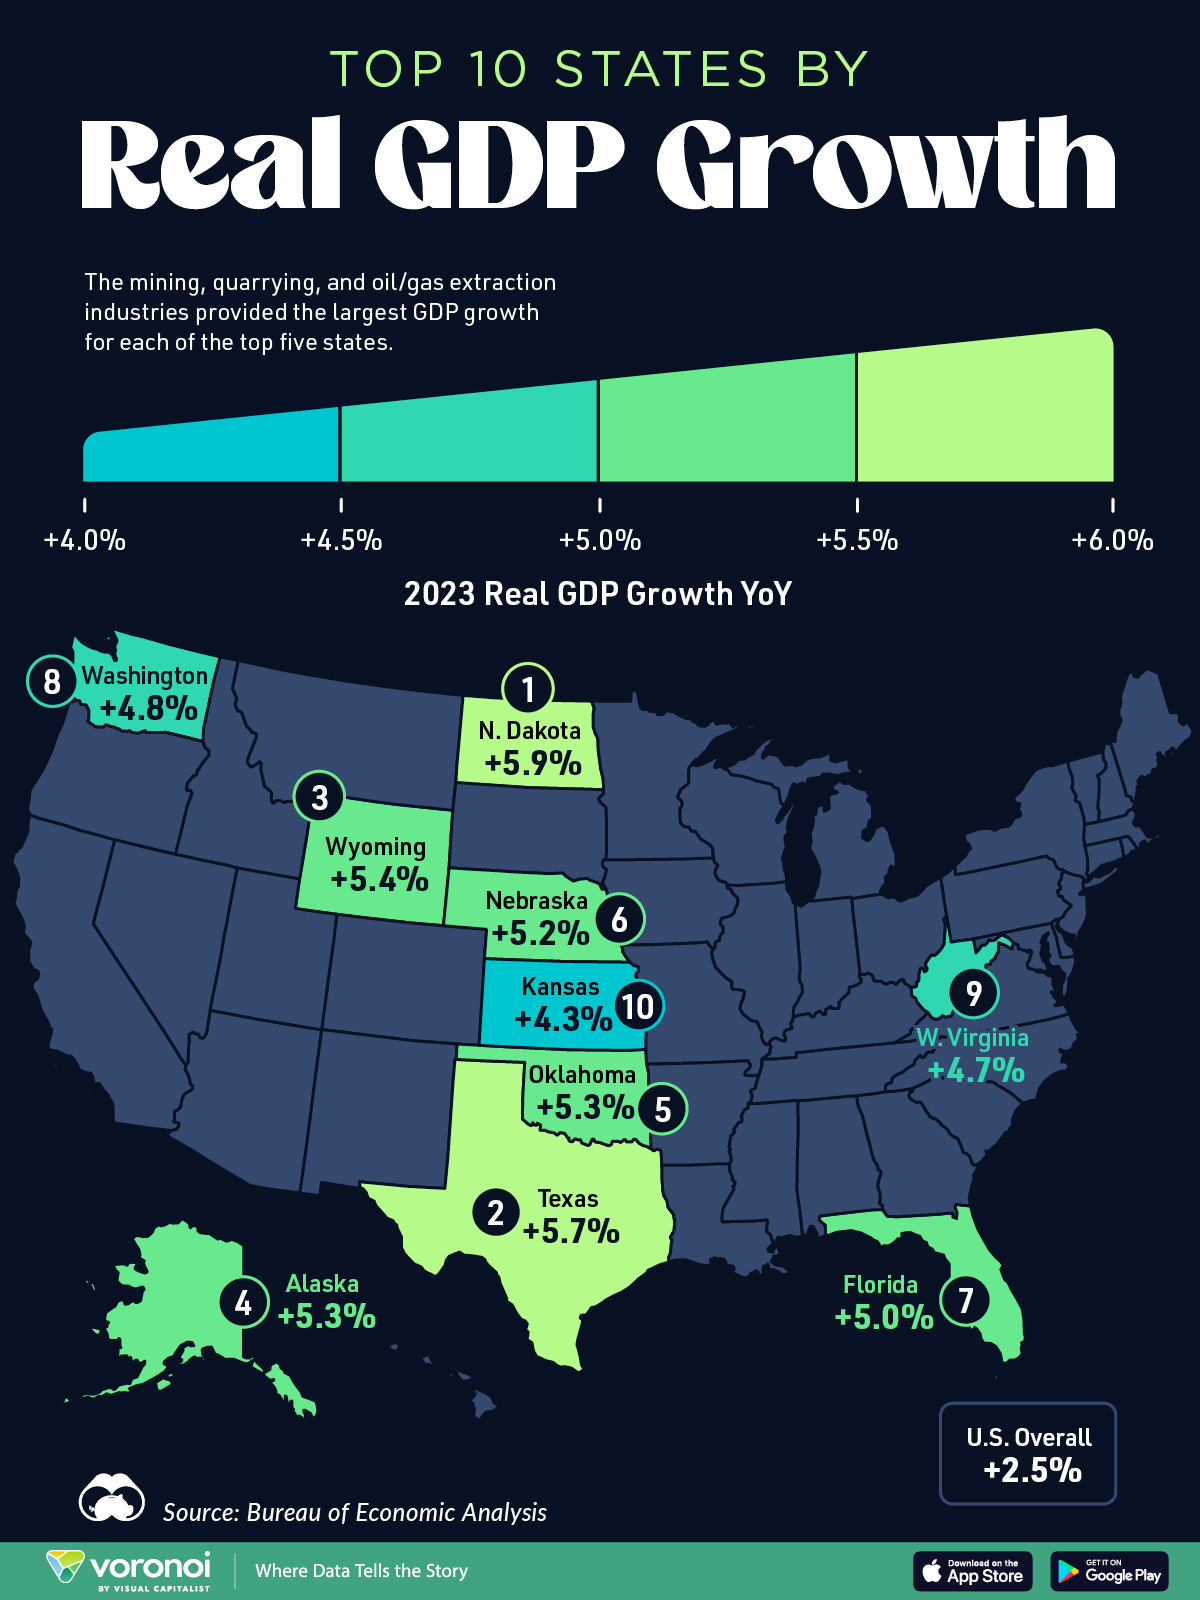 This map shows the states with the highest real GDP growth rate in 2023.